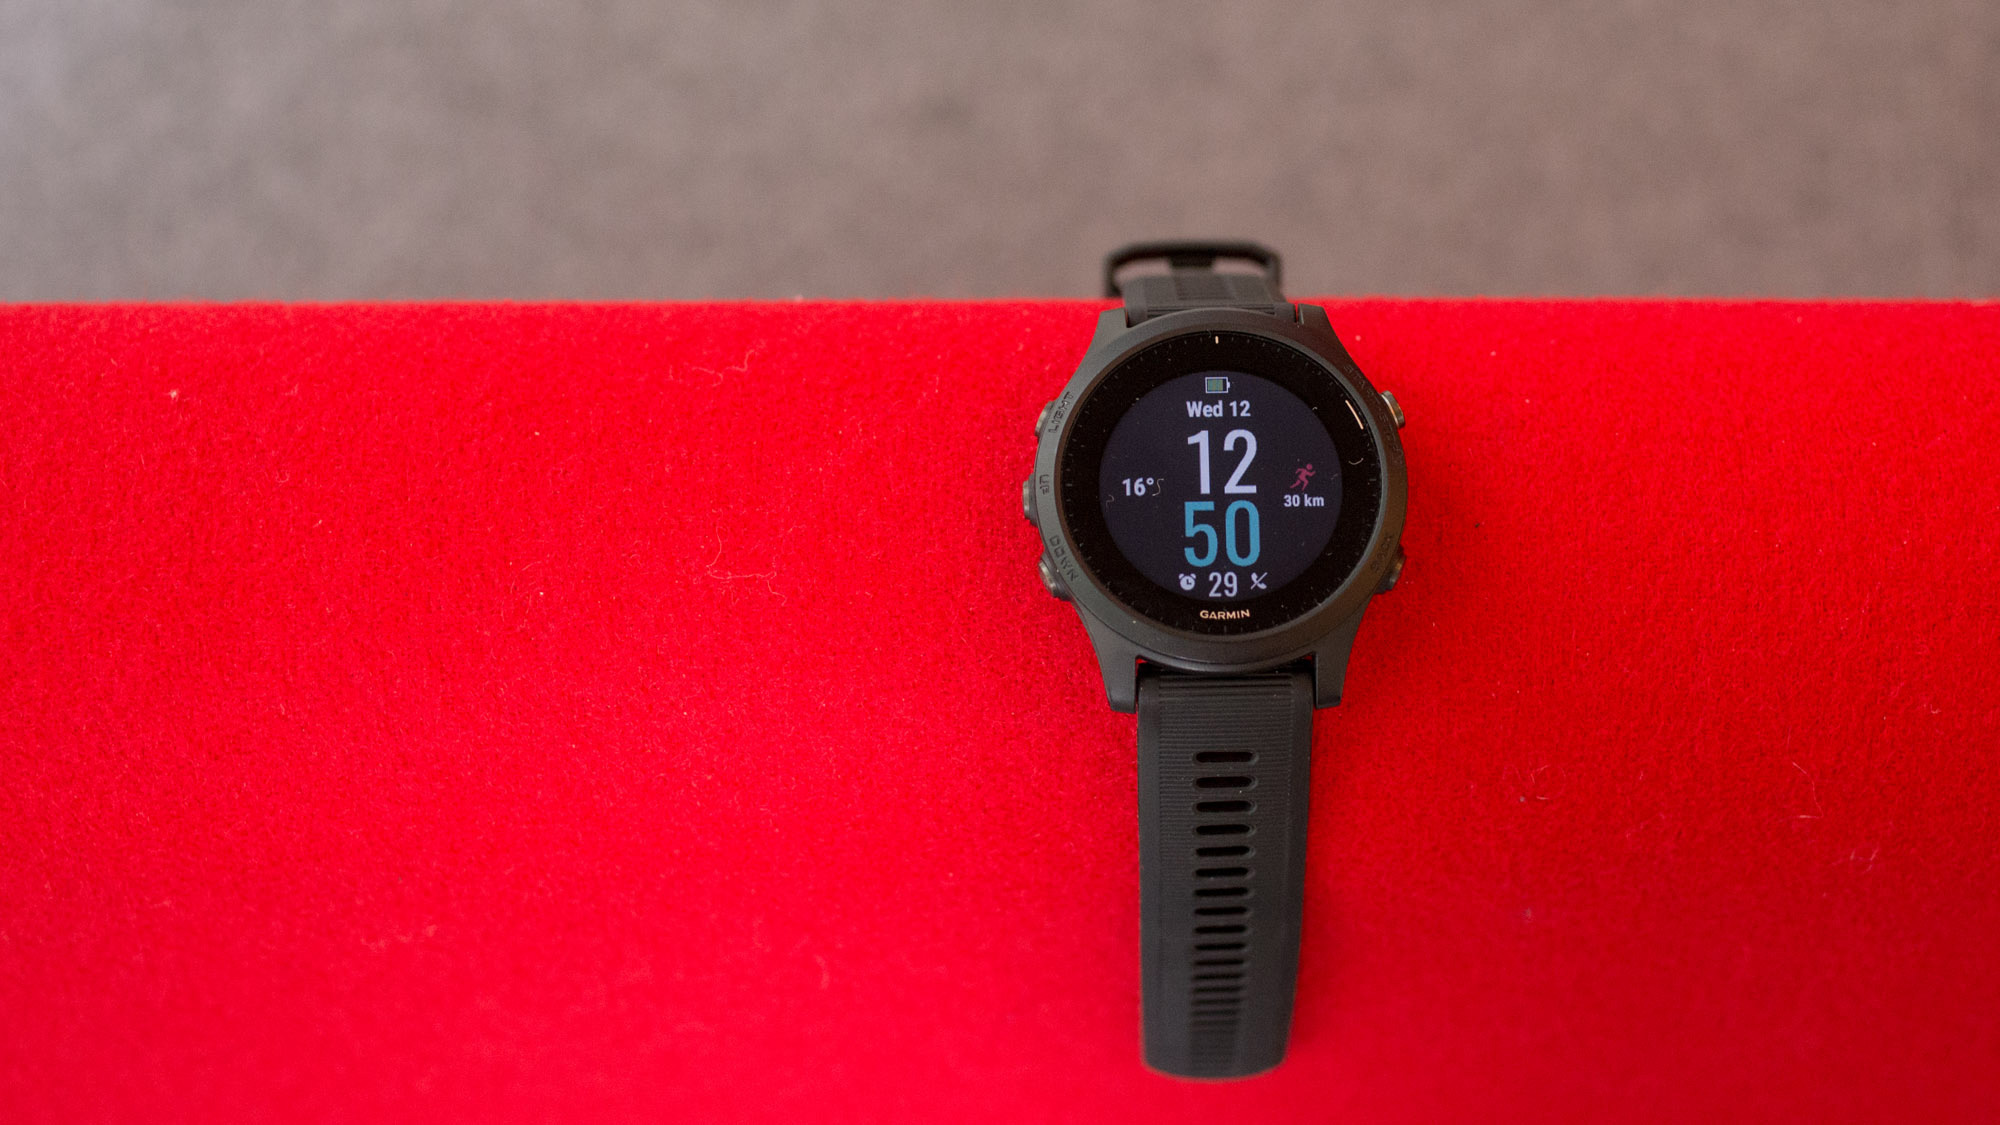 Garmin Forerunner 945 Review: Fitness Tracking on a Whole New Level